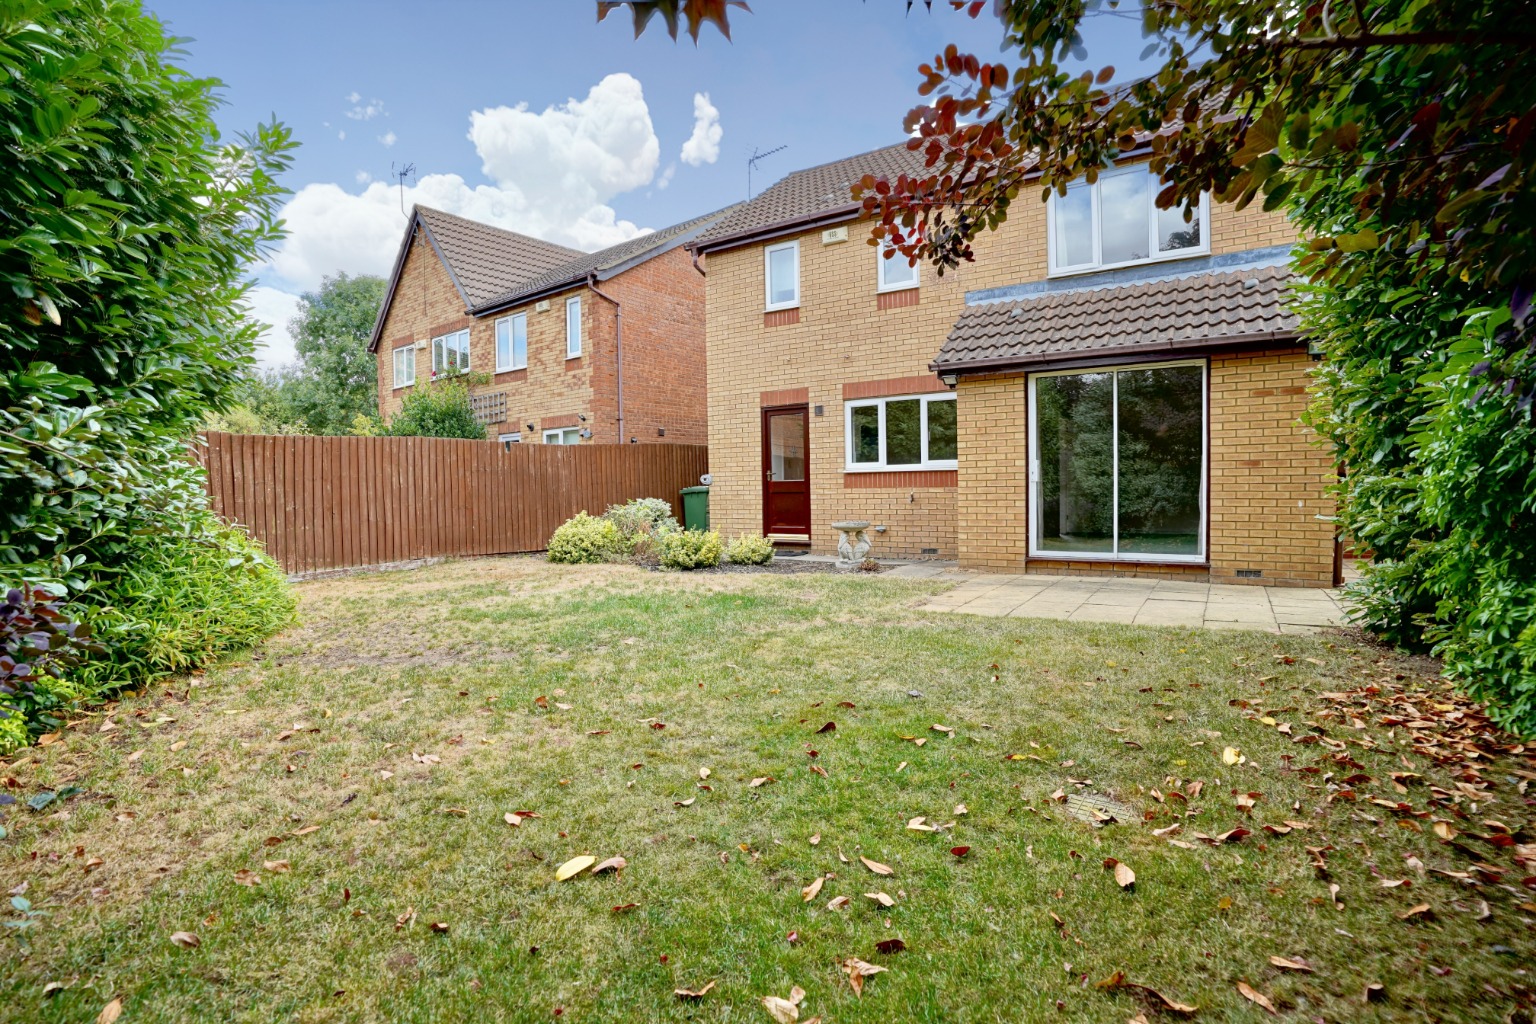 3 bed detached house for sale in Laws Crescent, Huntingdon  - Property Image 4